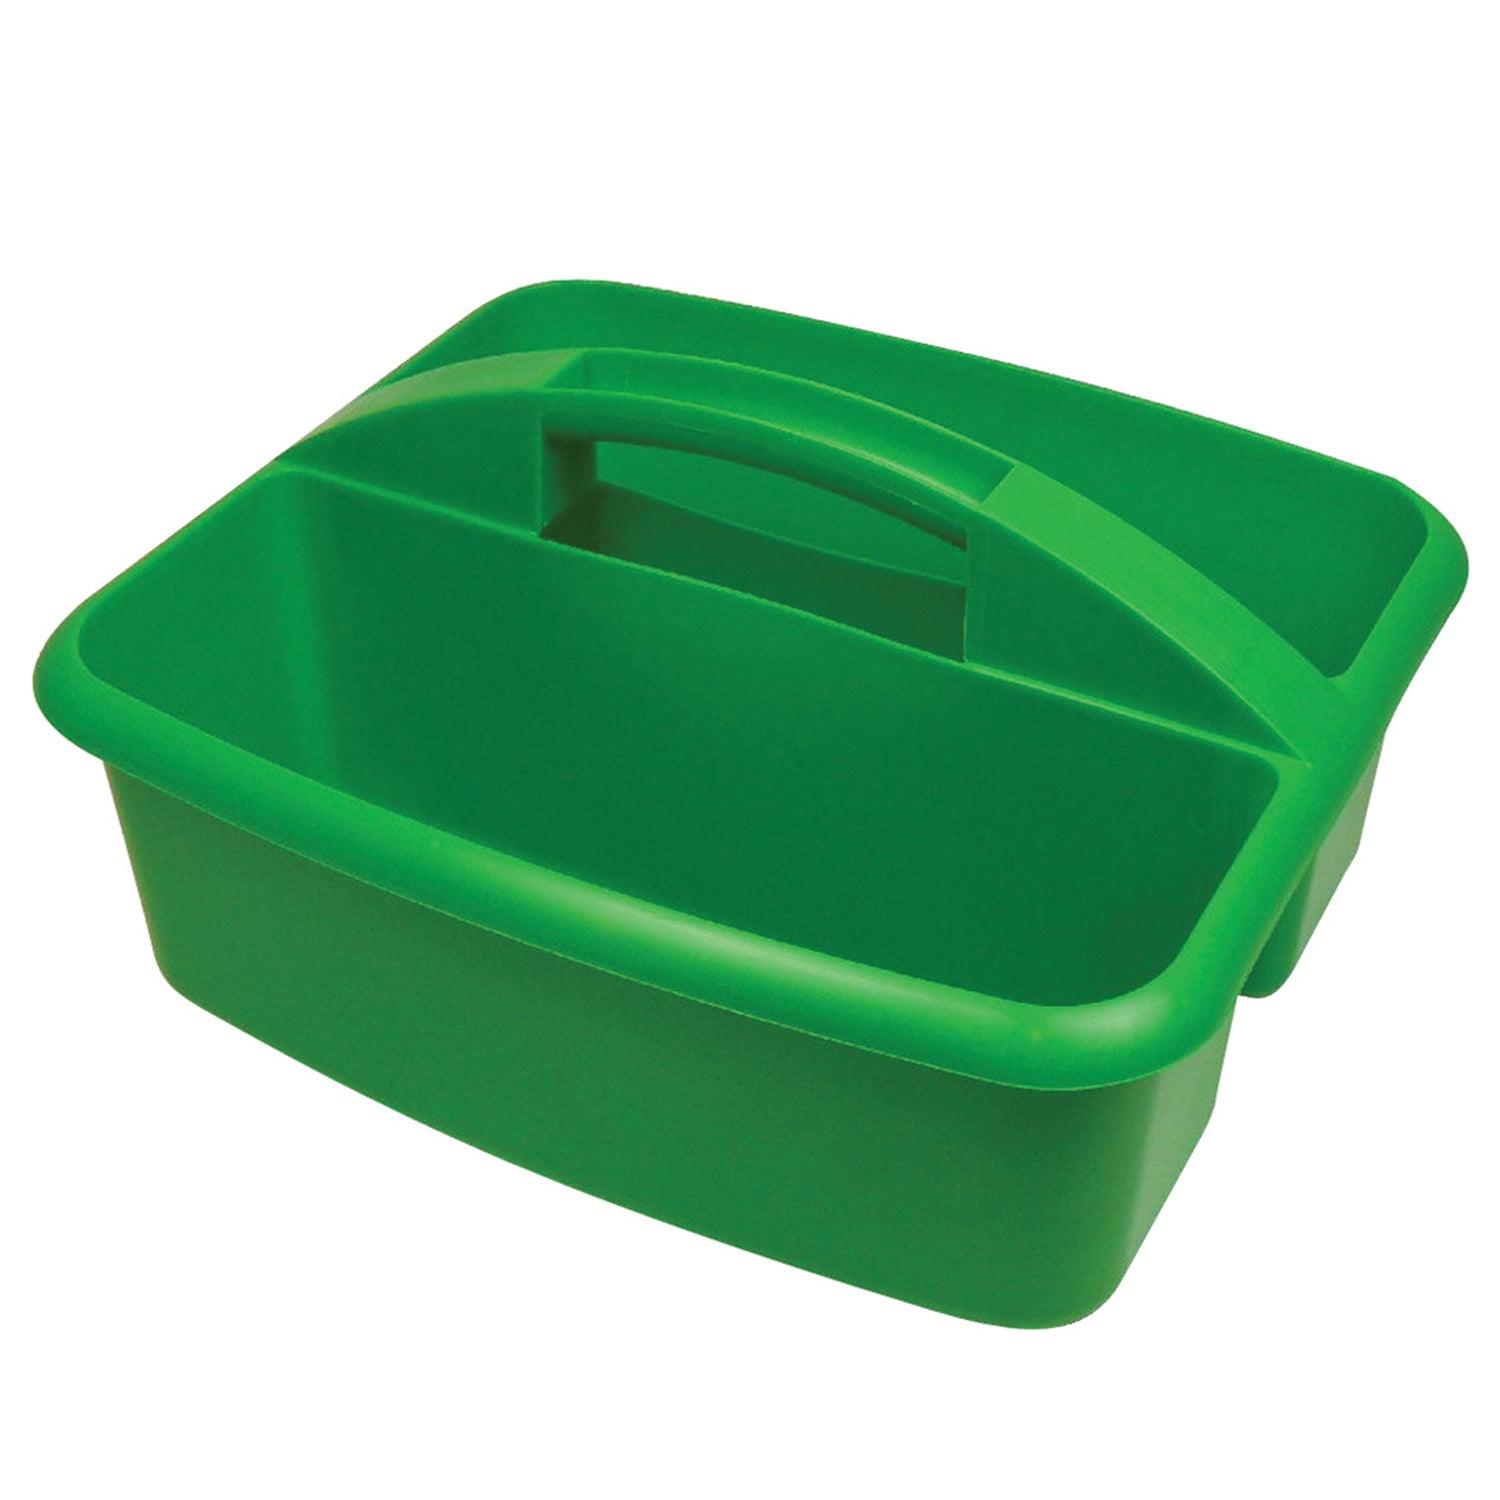 Large Utility Caddy, Green, Pack of 3 - Loomini